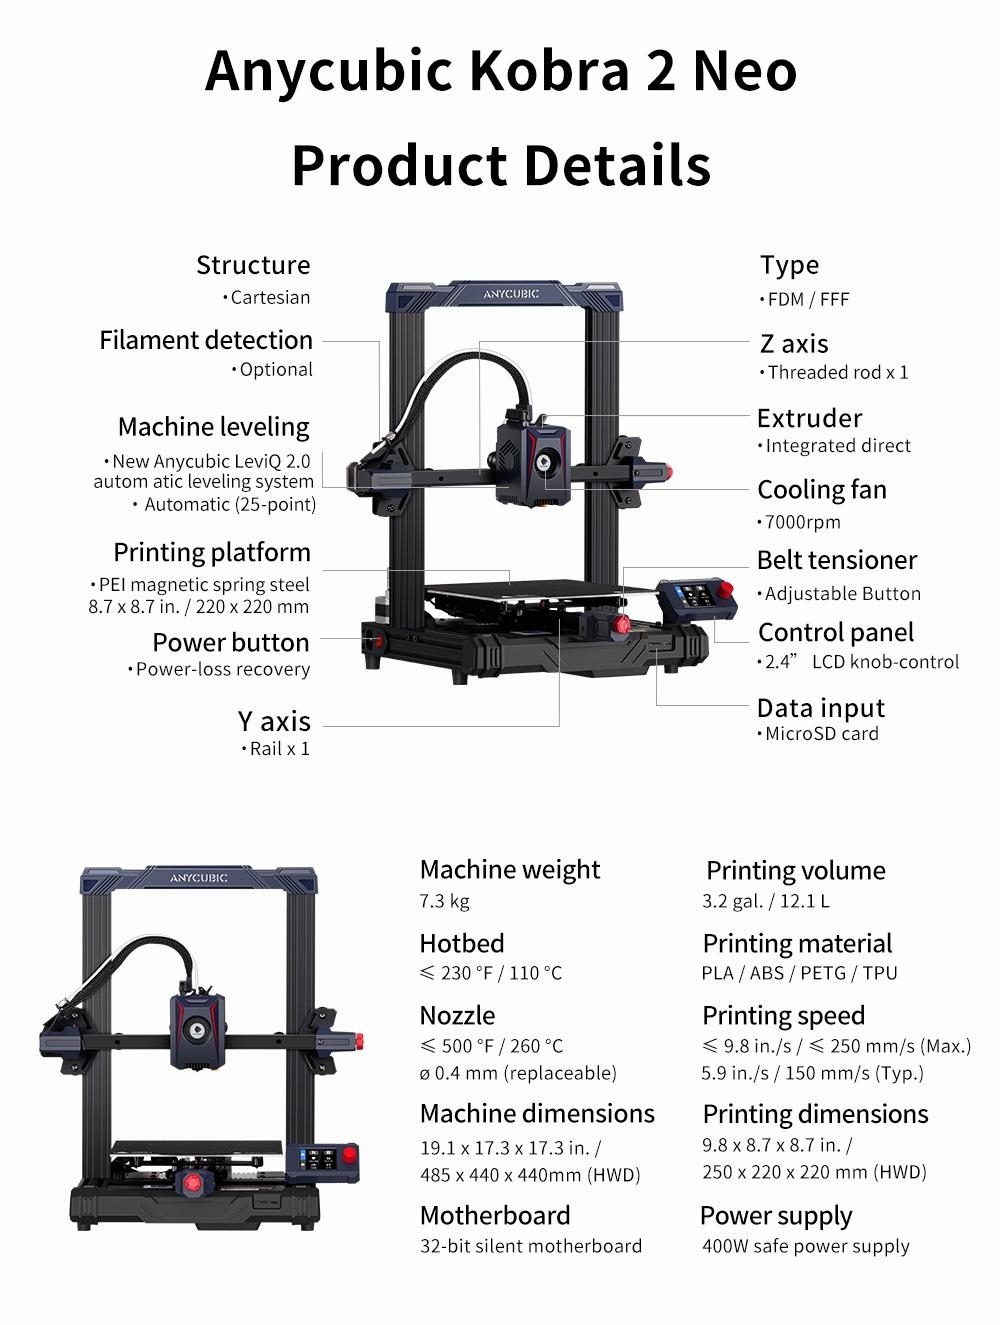 The Anycubic Kobra 2 Neo is a 3D printer with a build volume of 8.7 x 8.7 x 8.7 inches, a print speed of up to 9.8 inches per second, and a heated bed that can reach temperatures of up to 230 degrees Fahrenheit.